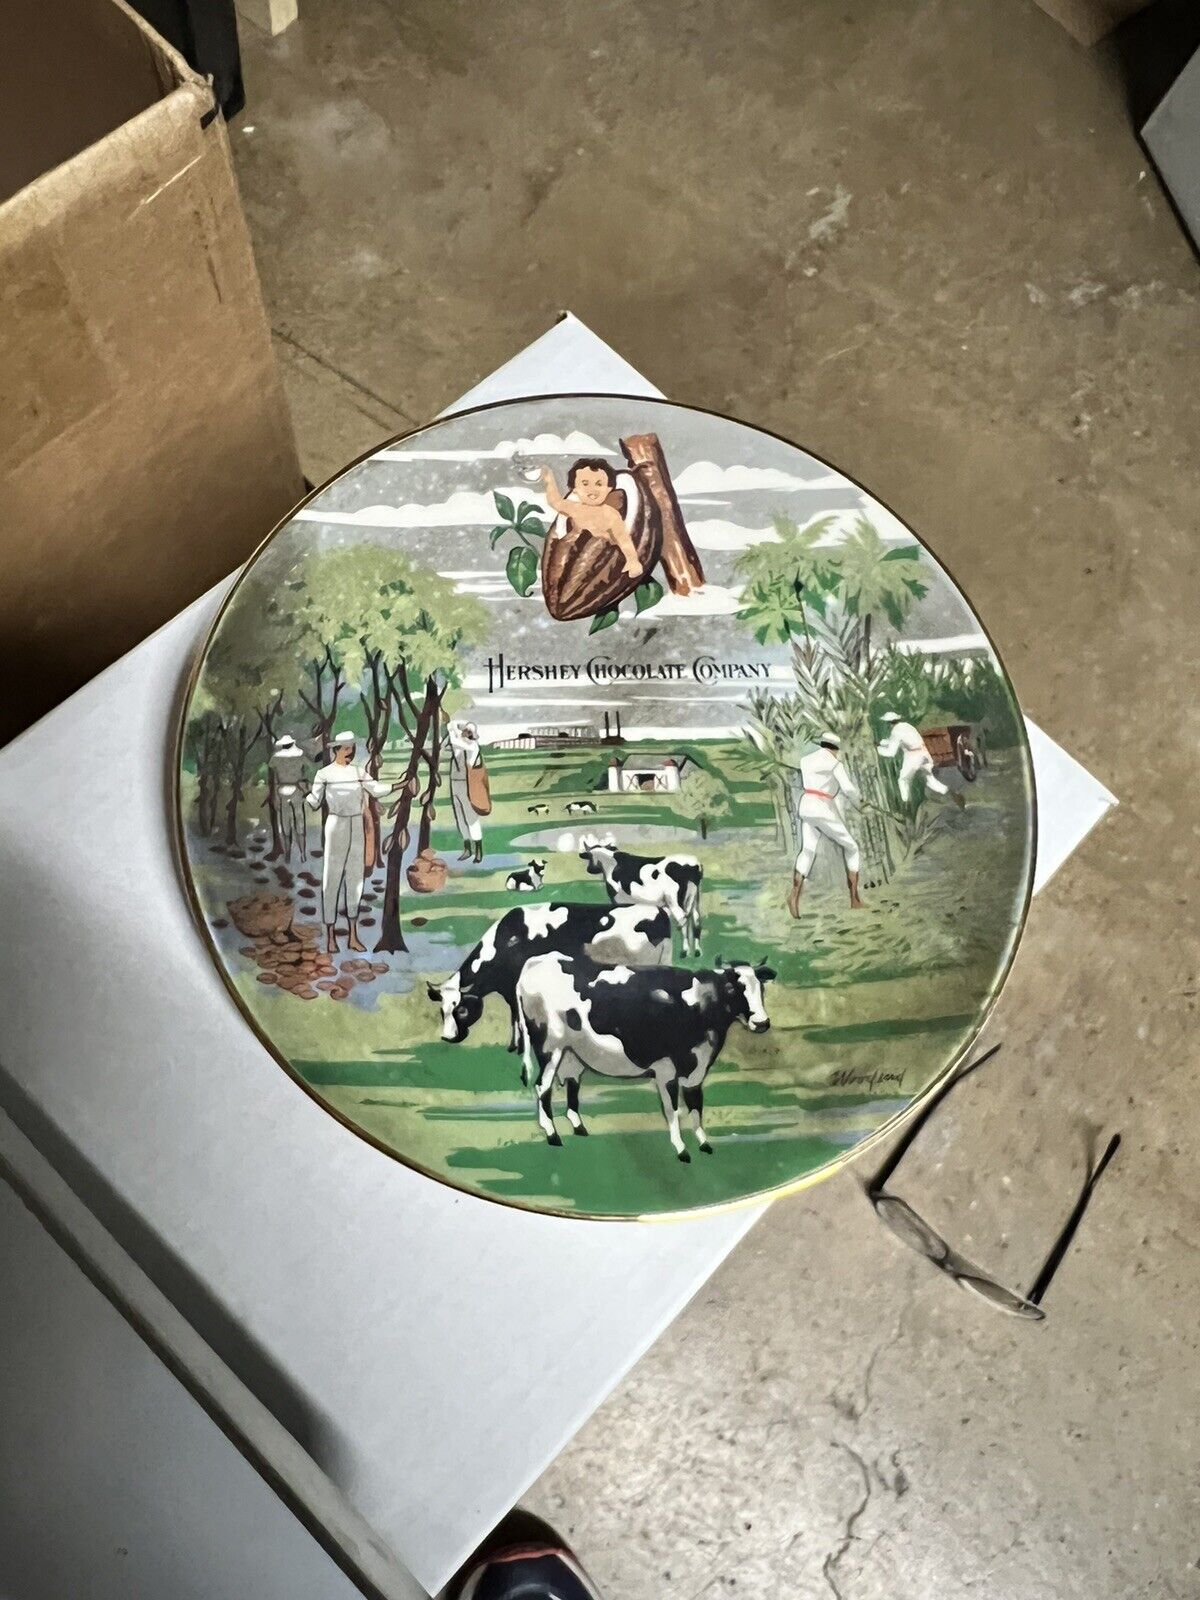 1981 Hershey Chocolate Company Commemorative Plate in Original Box w/Papers